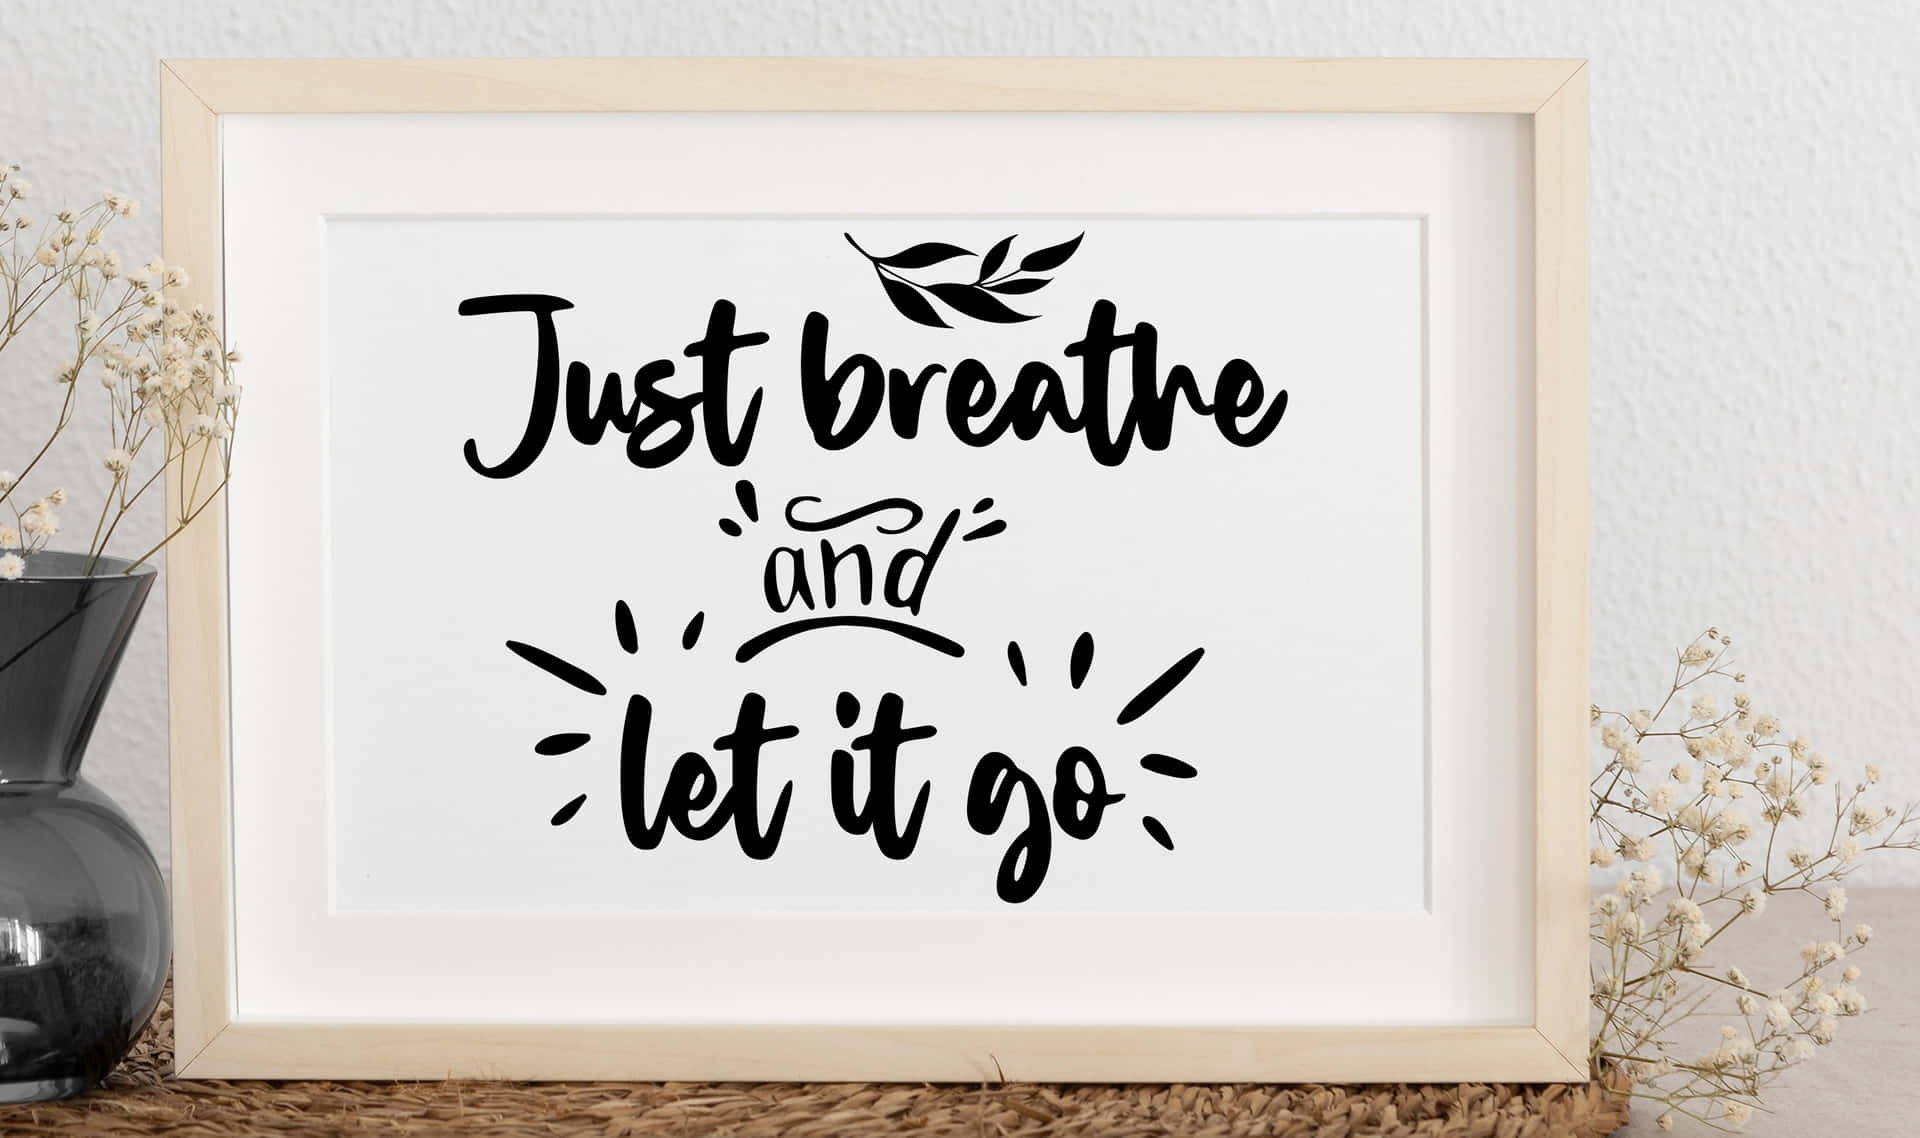 Embracing Tranquility With A Breathe & Let It Go Image Background